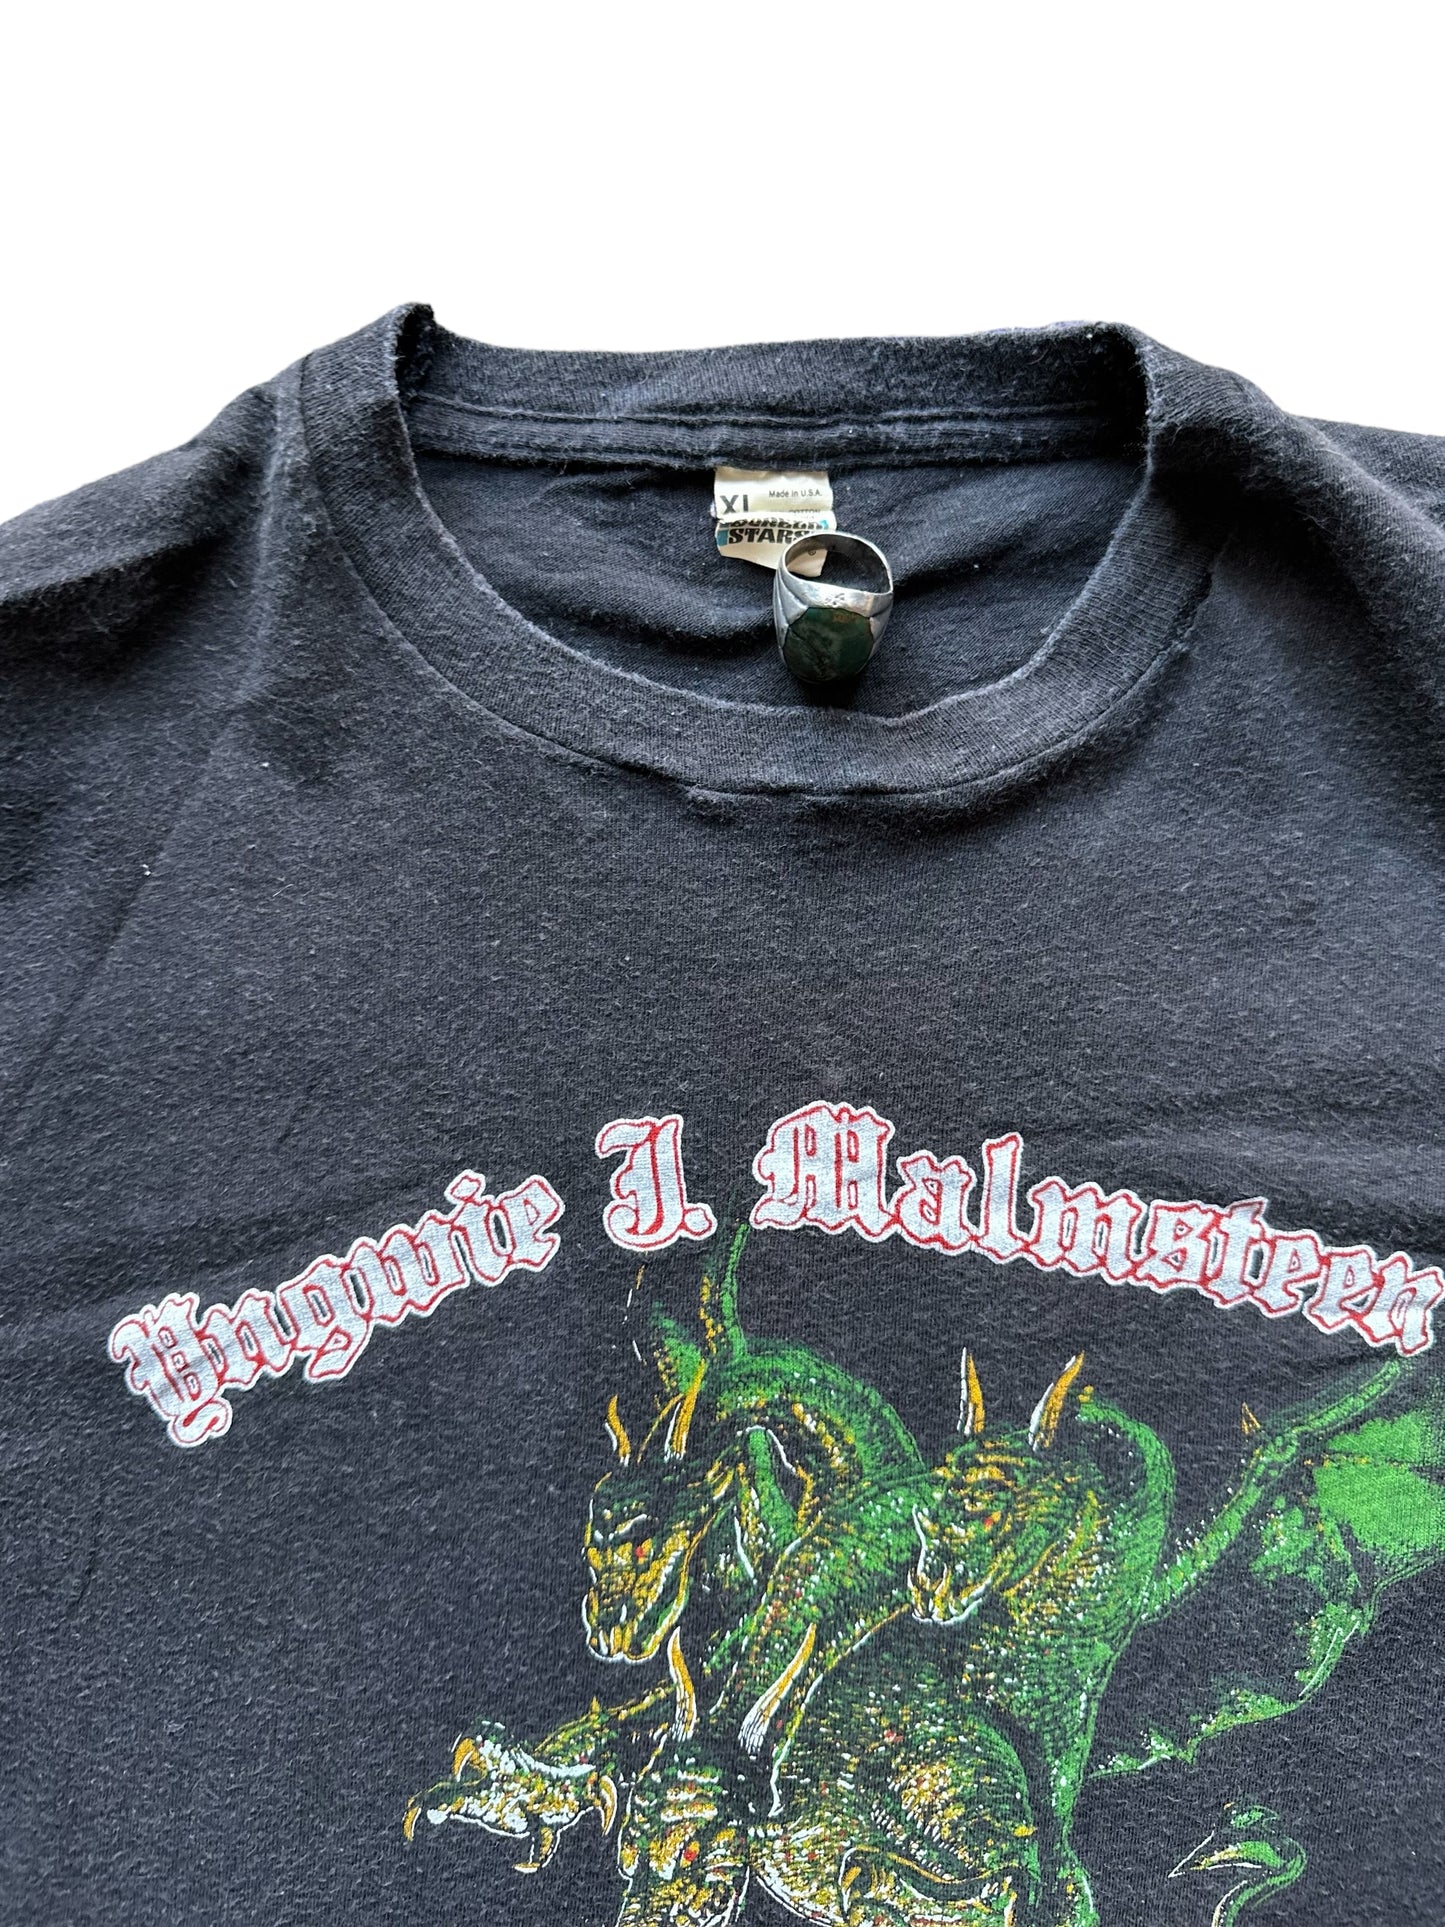 Tag View of Vintage Yngwie Malmsteen Trilogy World Tour Shirt Size XLarge | Vintage Metal Rock Tee | Barn Owl Vintage Seattle